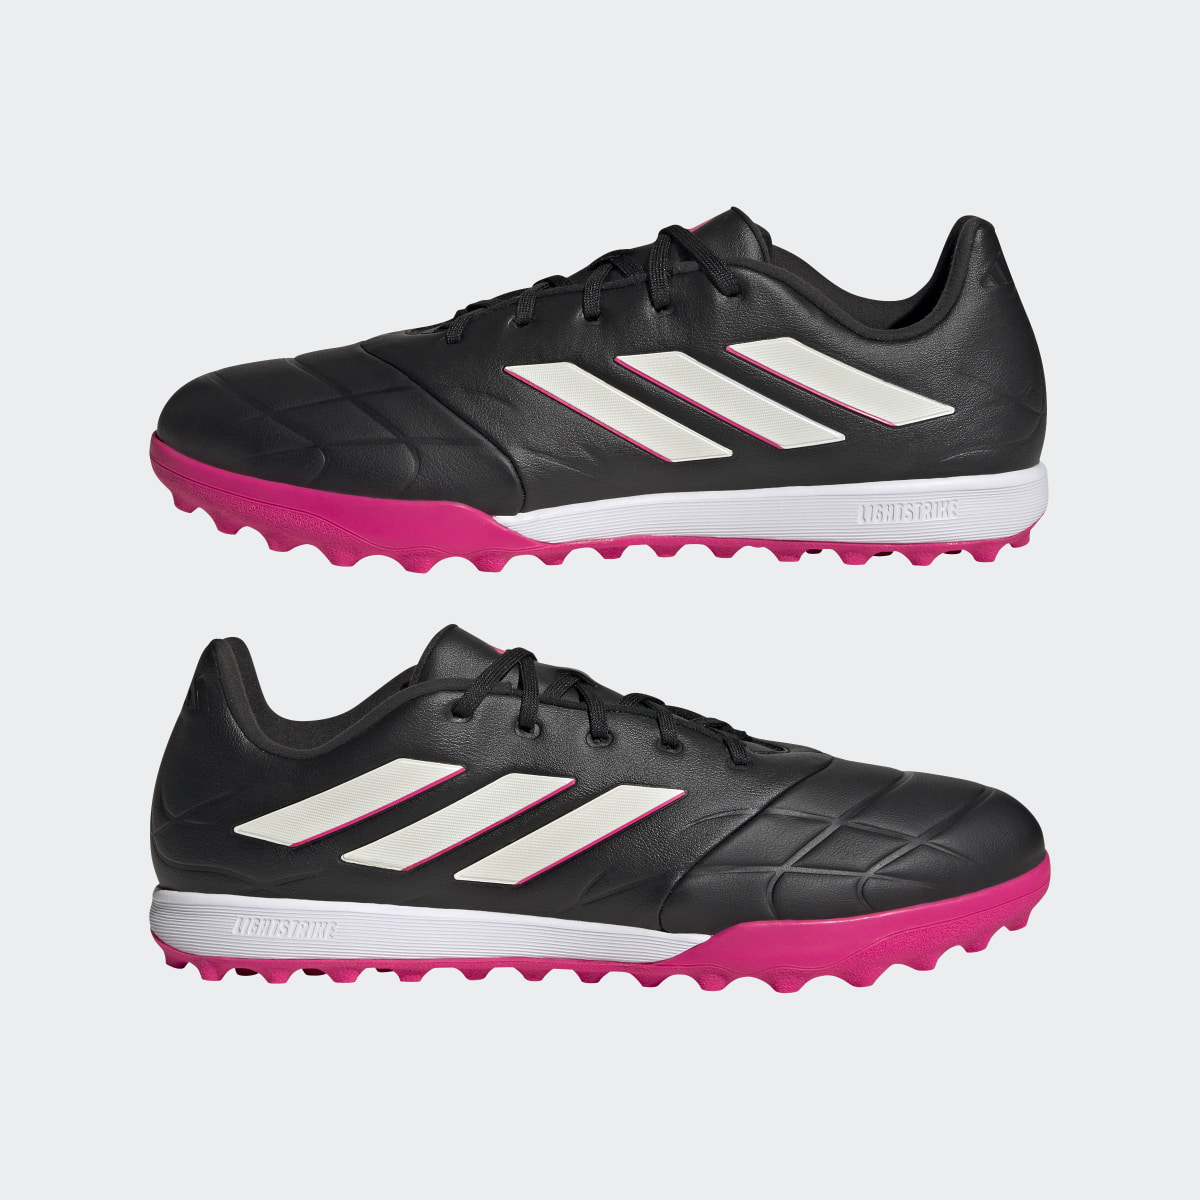 Adidas Copa Pure.3 Turf Boots. 8